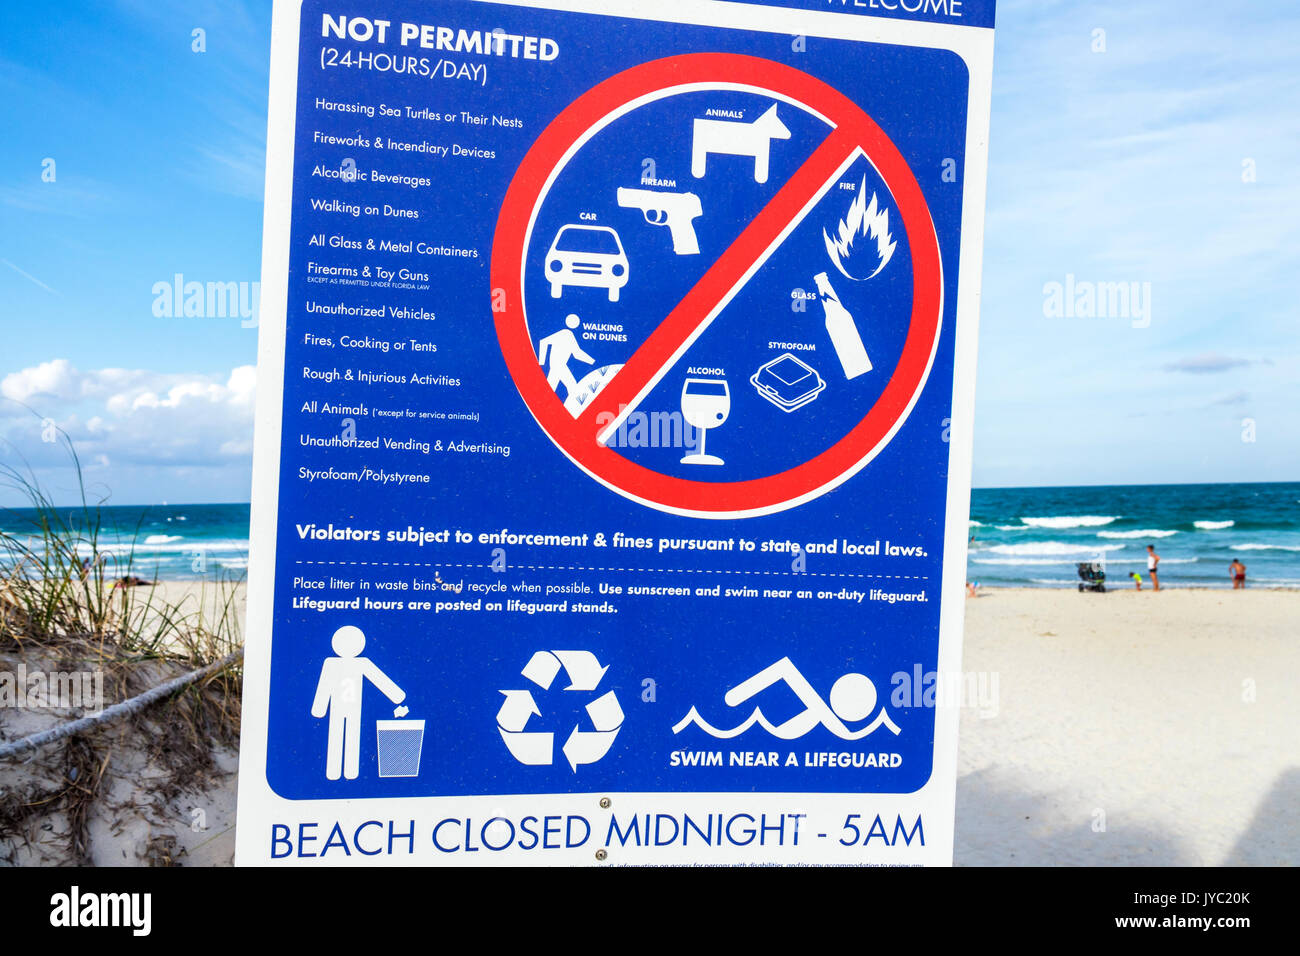 Miami Beach Florida,regulatory sign,warning,not permitted,drink drinks beverage beverages drinking,alcohol,animals,firearms,fire,rules,visitors travel Stock Photo